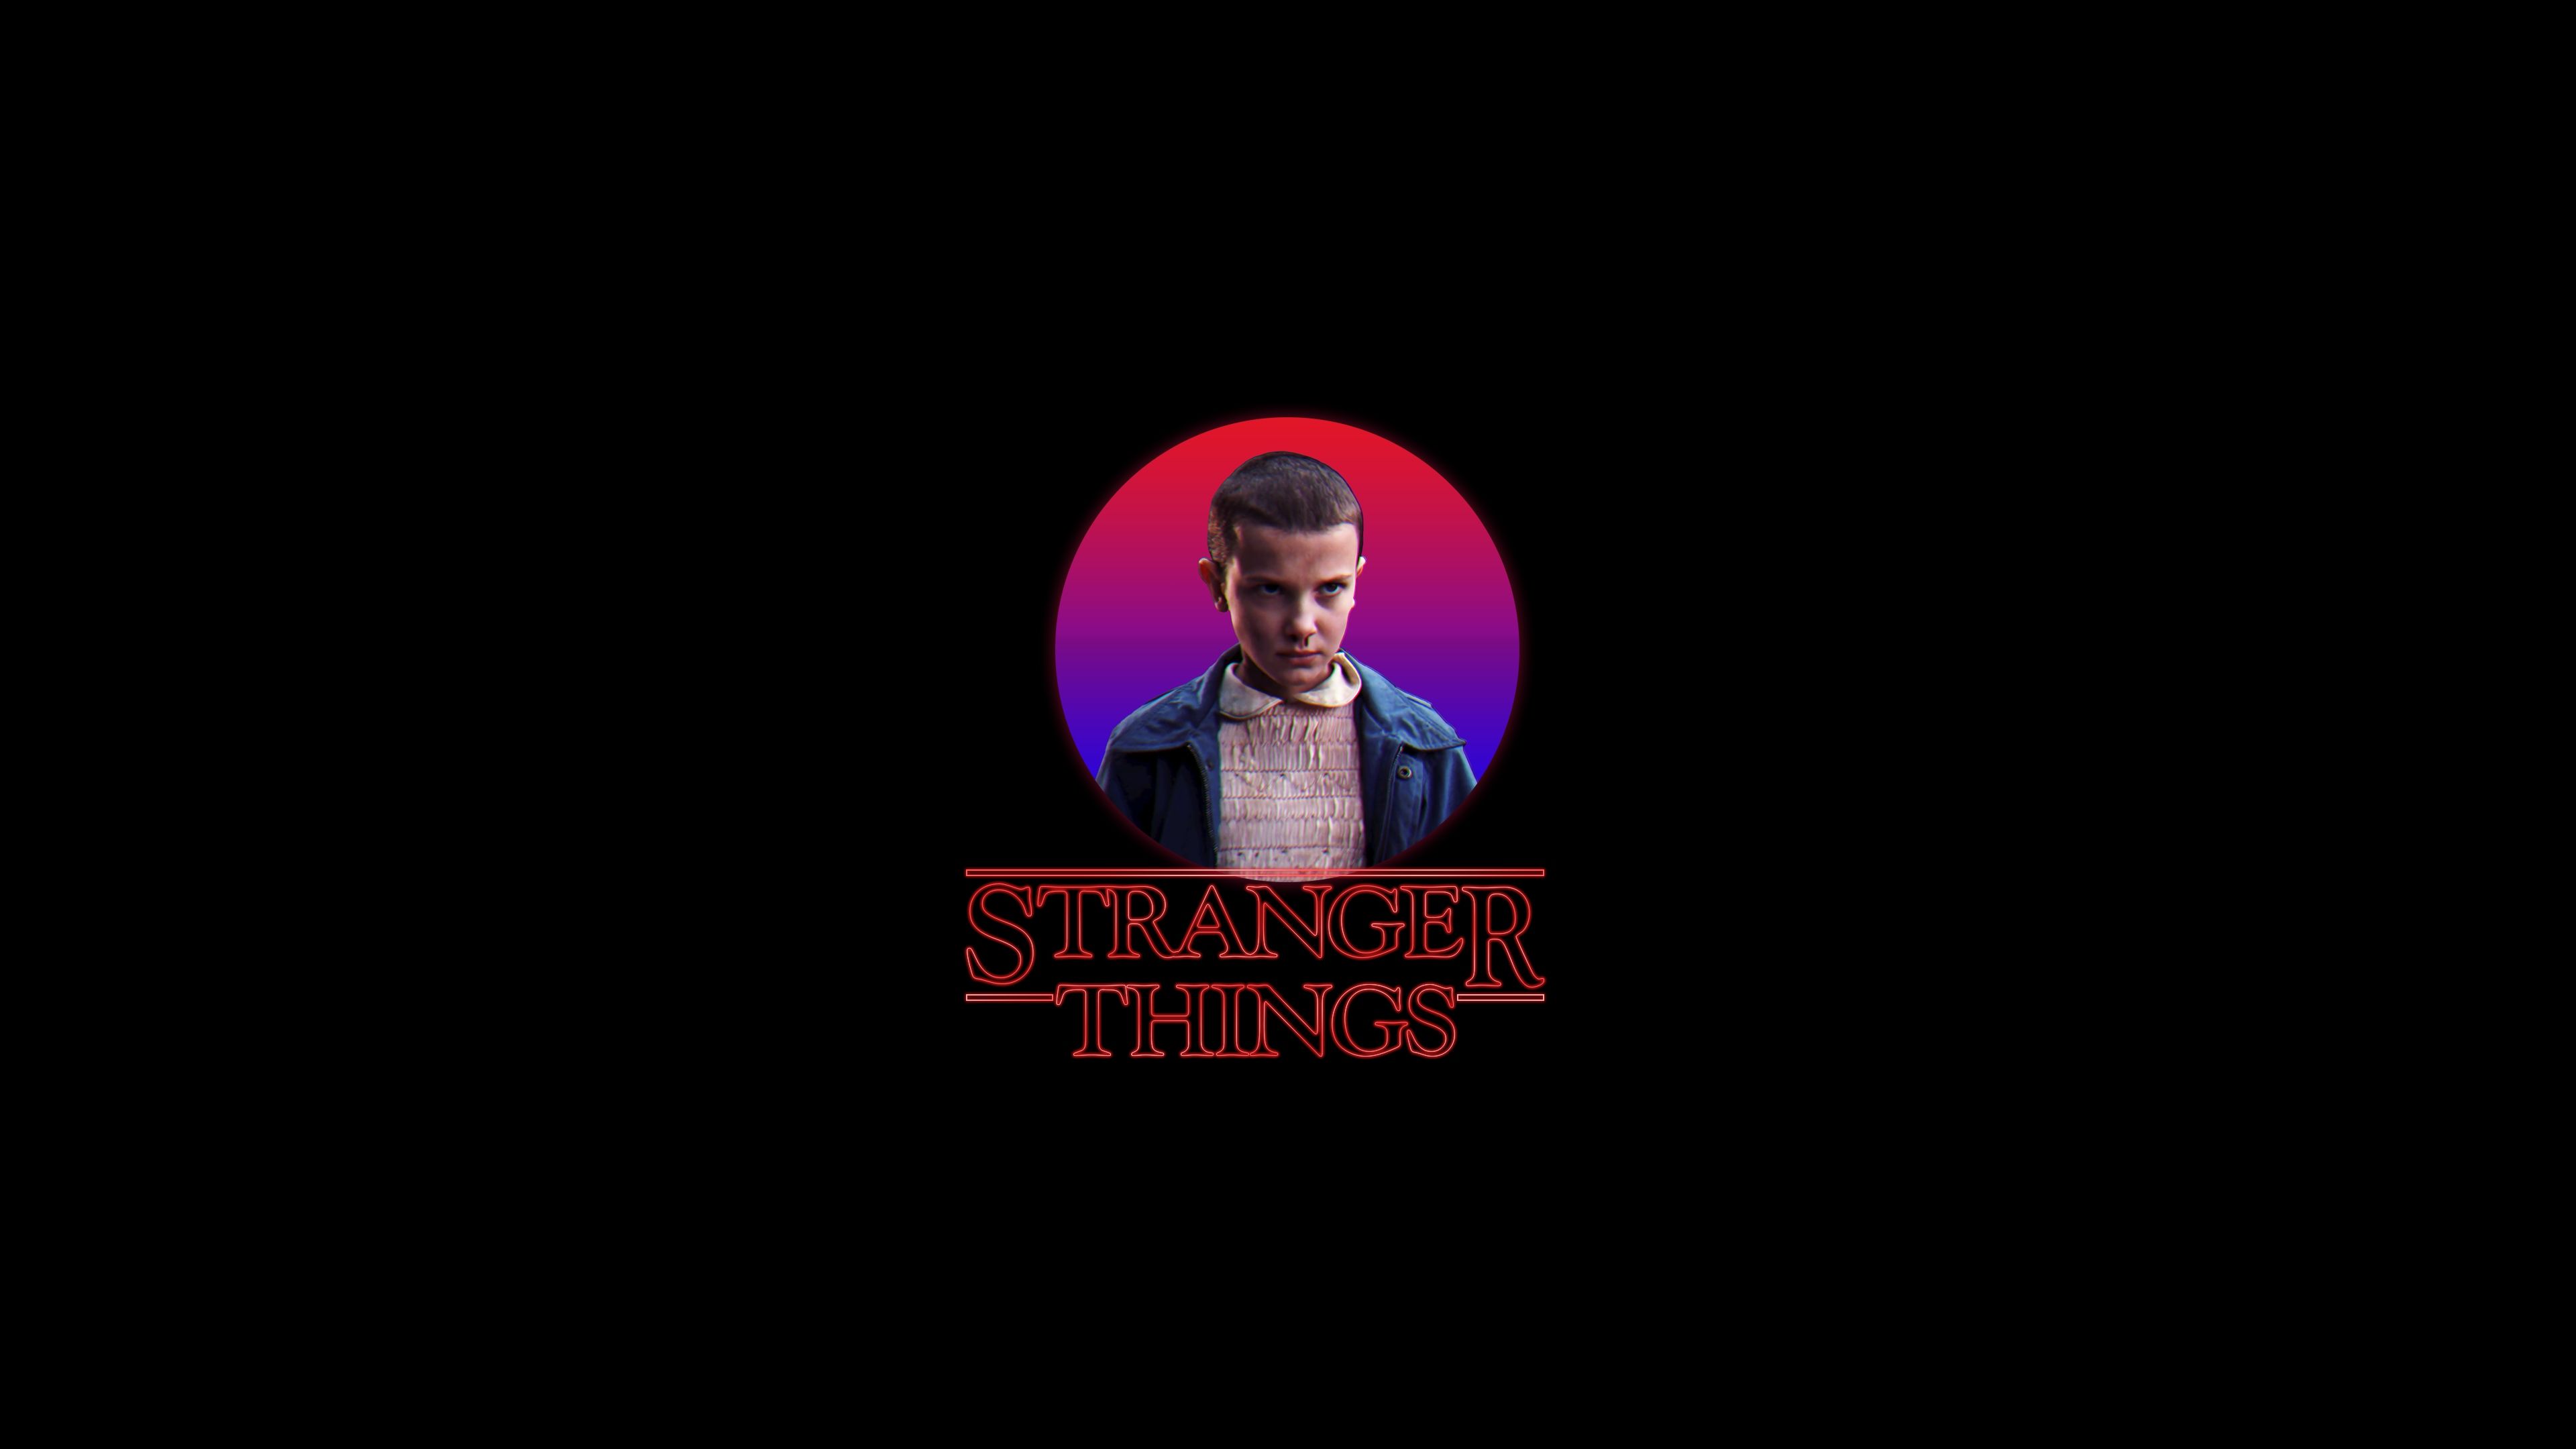 Stranger Things wallpaper with the image of Eleven - Stranger Things